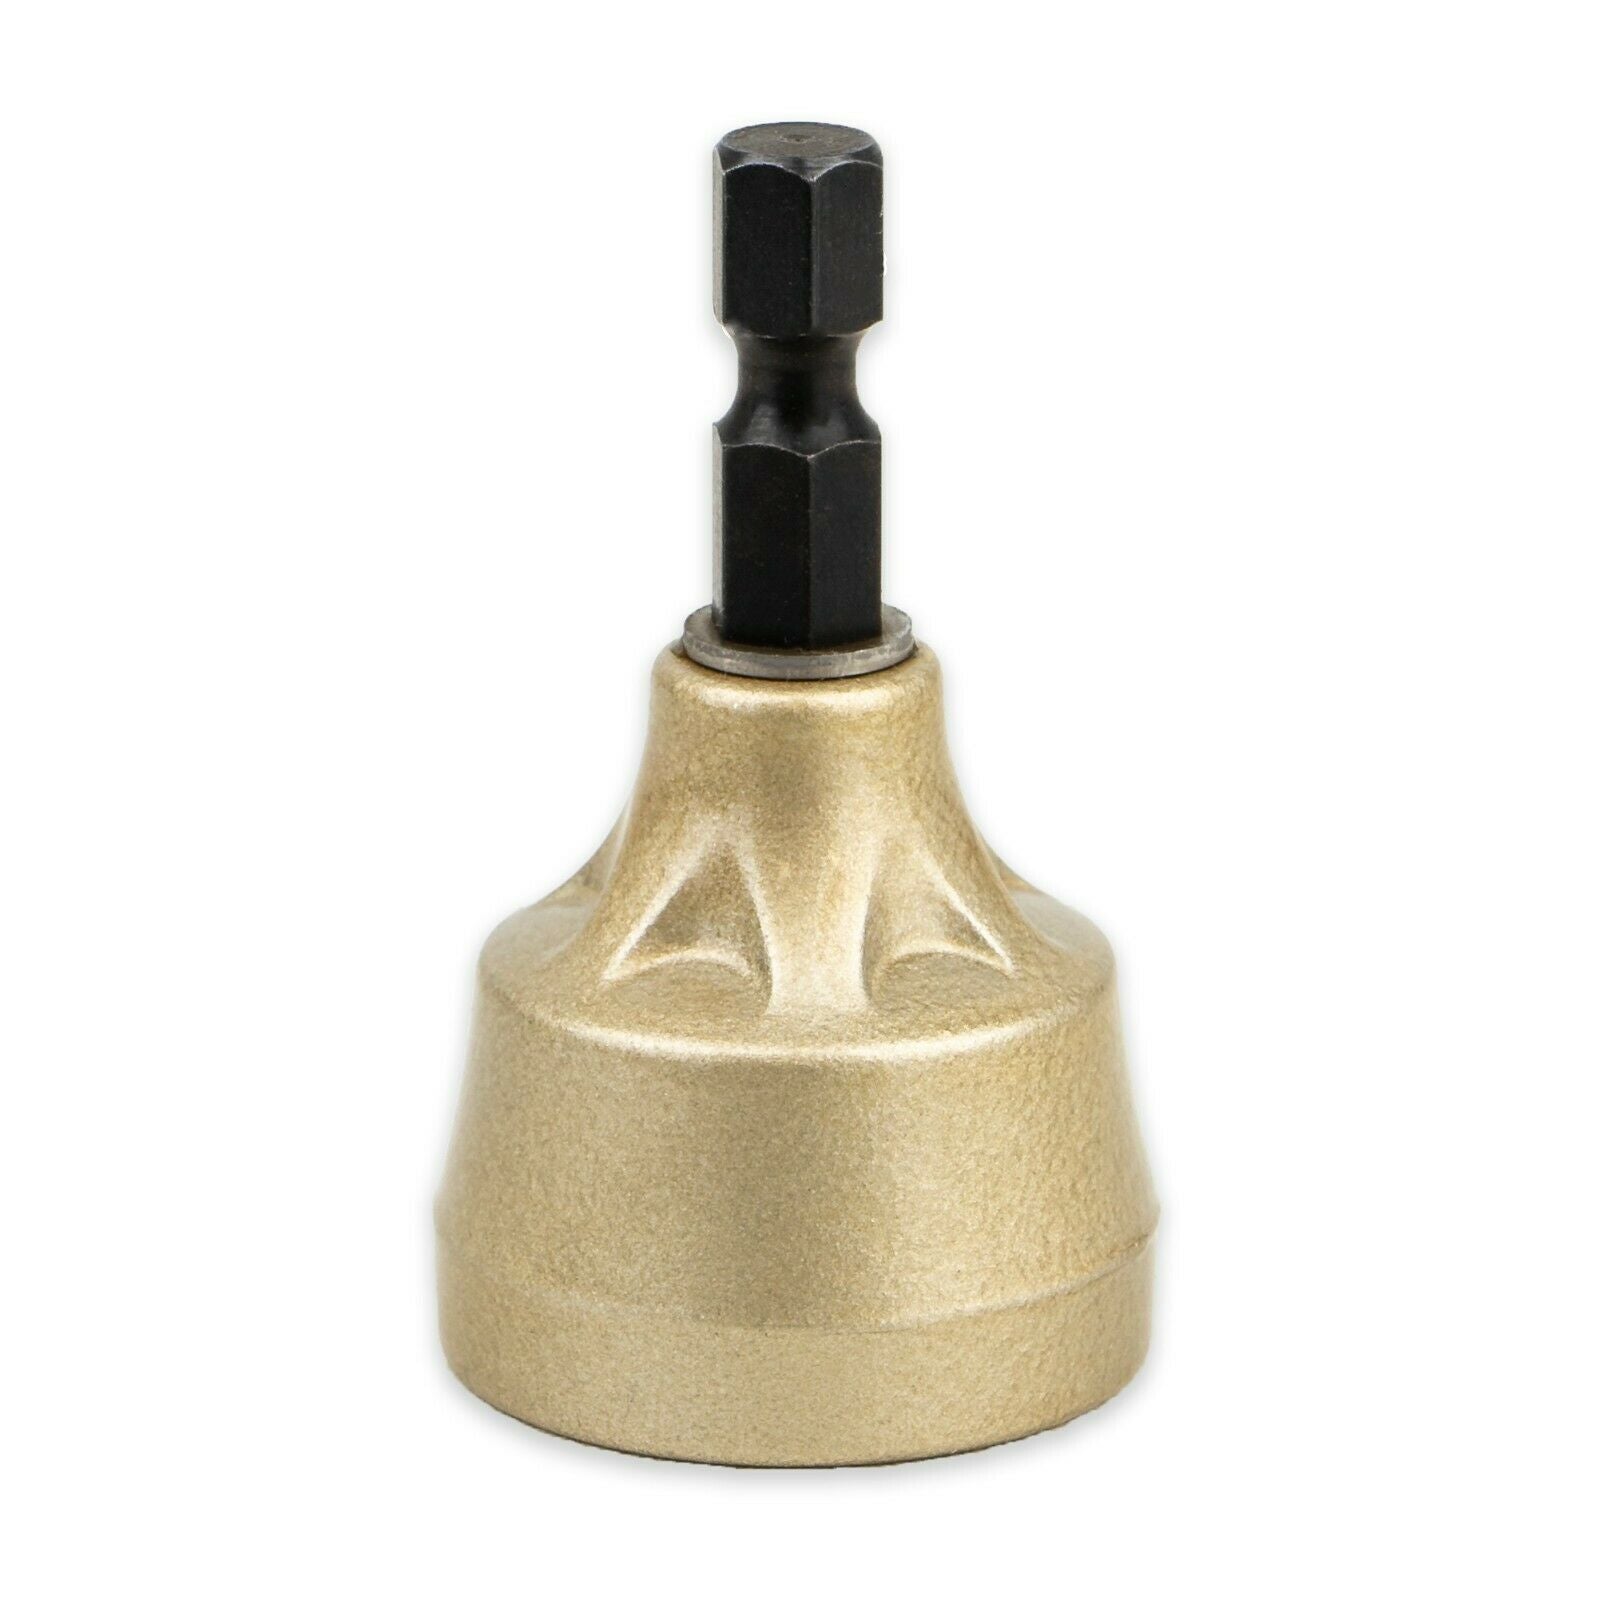 Deburring External Chamfer Drill Bit Tool Tungsten Blades, Removes Burrs on 1/8"-3/4"(3mm-19mm) Bolts